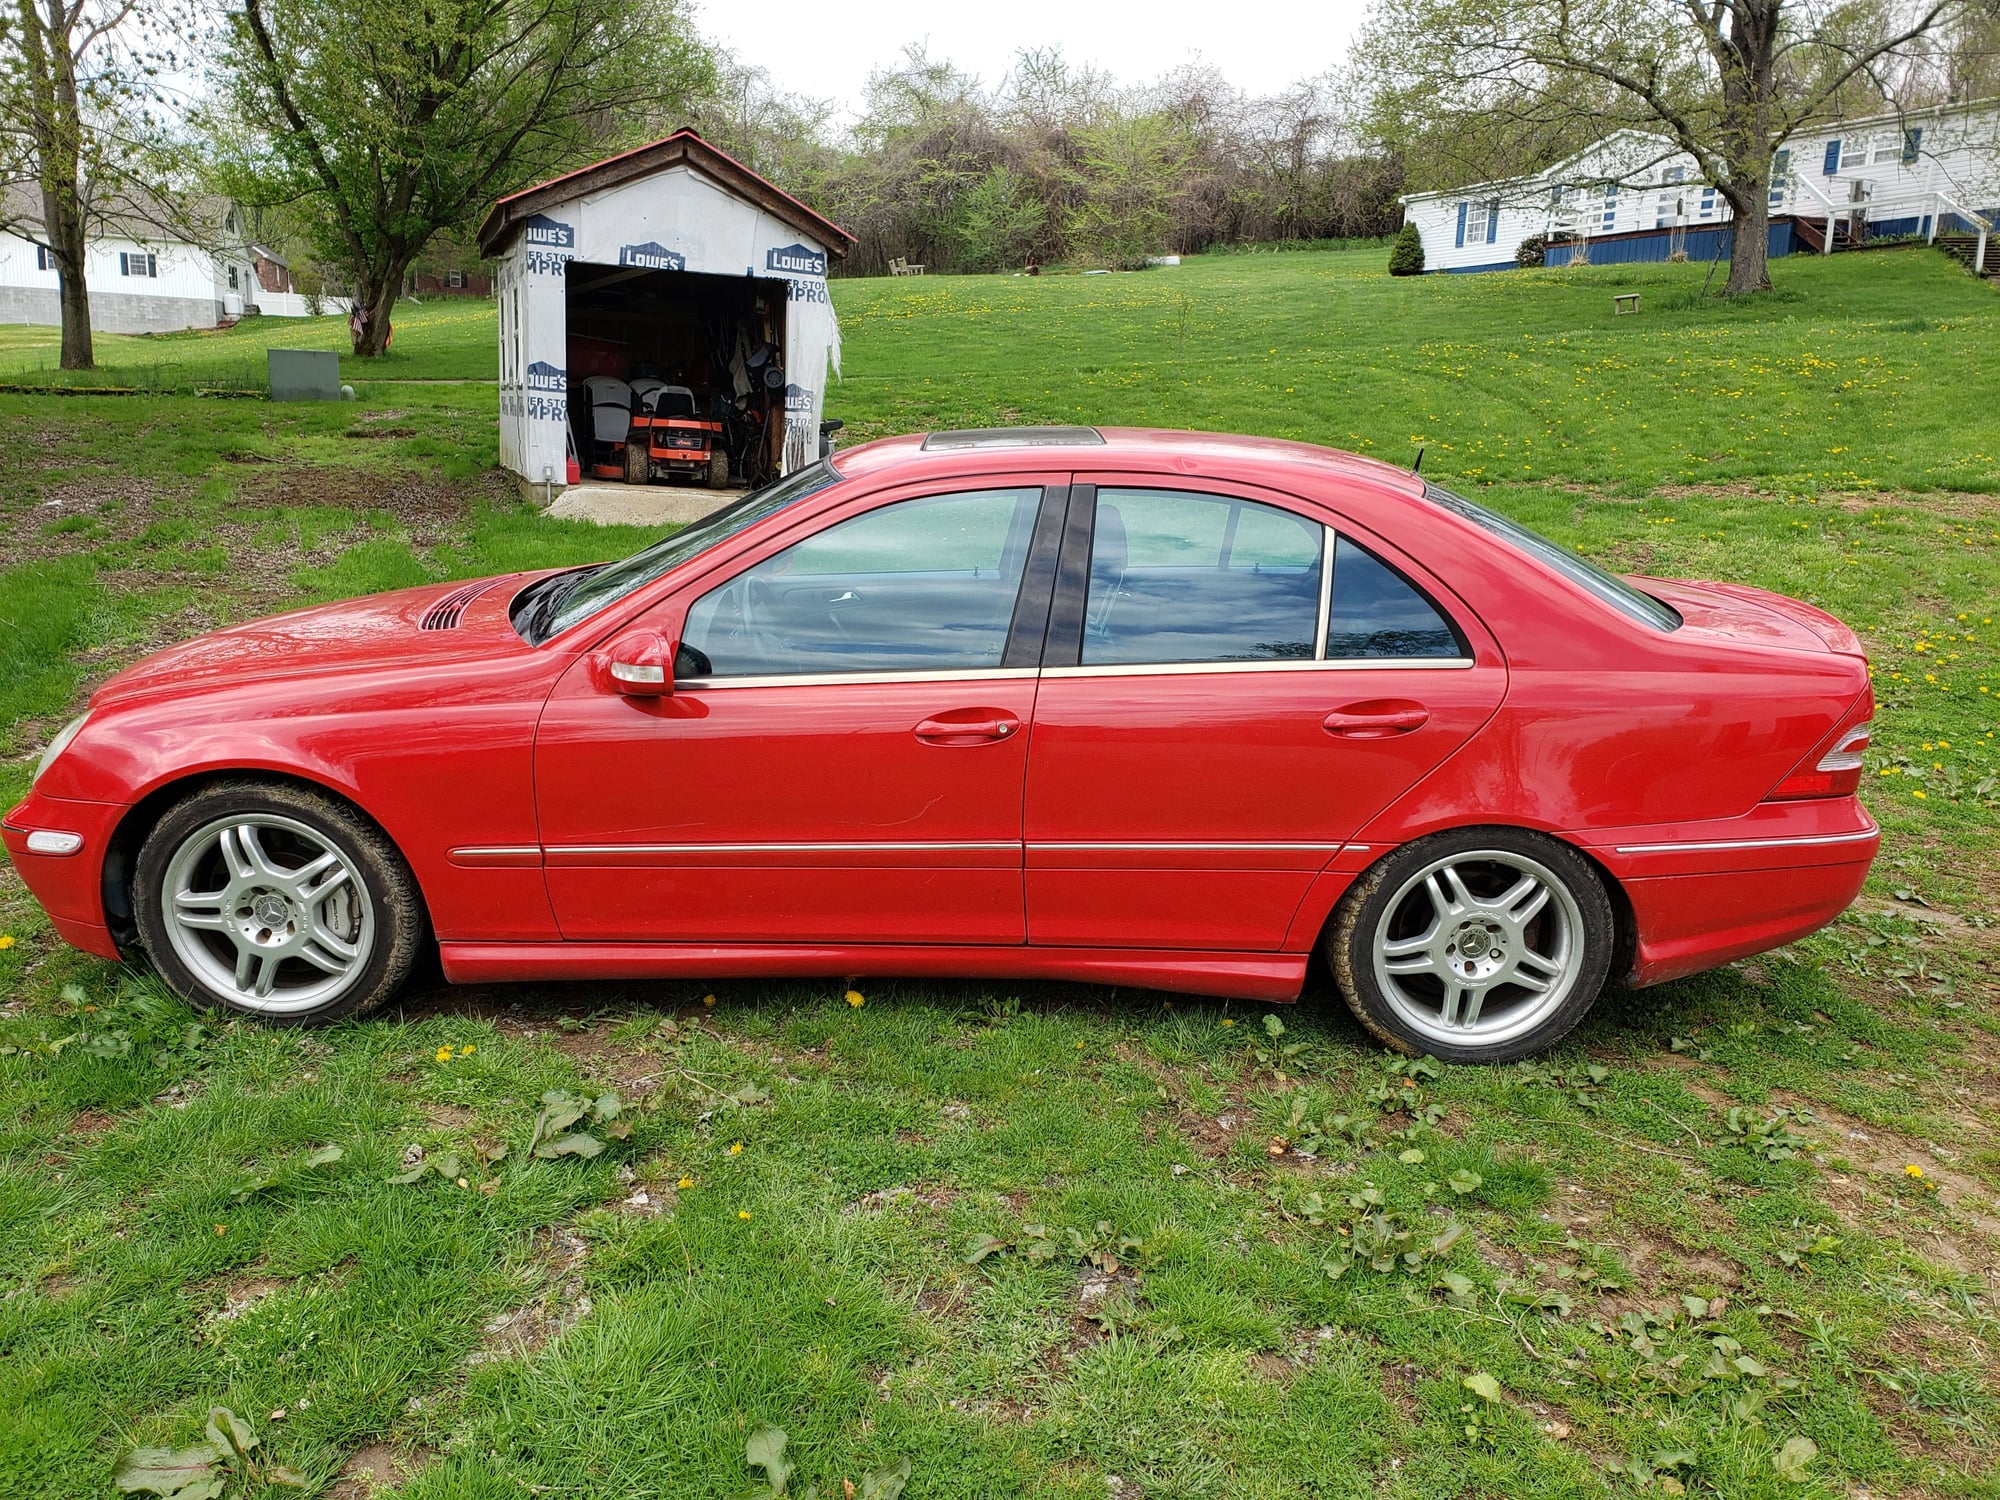 2002 Mercedes-Benz C32 AMG - 2002 C32 AMG FOR SALE - Used - VIN WDBRF65J12F160722 - 125,650 Miles - 6 cyl - 2WD - Automatic - Sedan - Red - Belle Vernon, PA 15012, United States